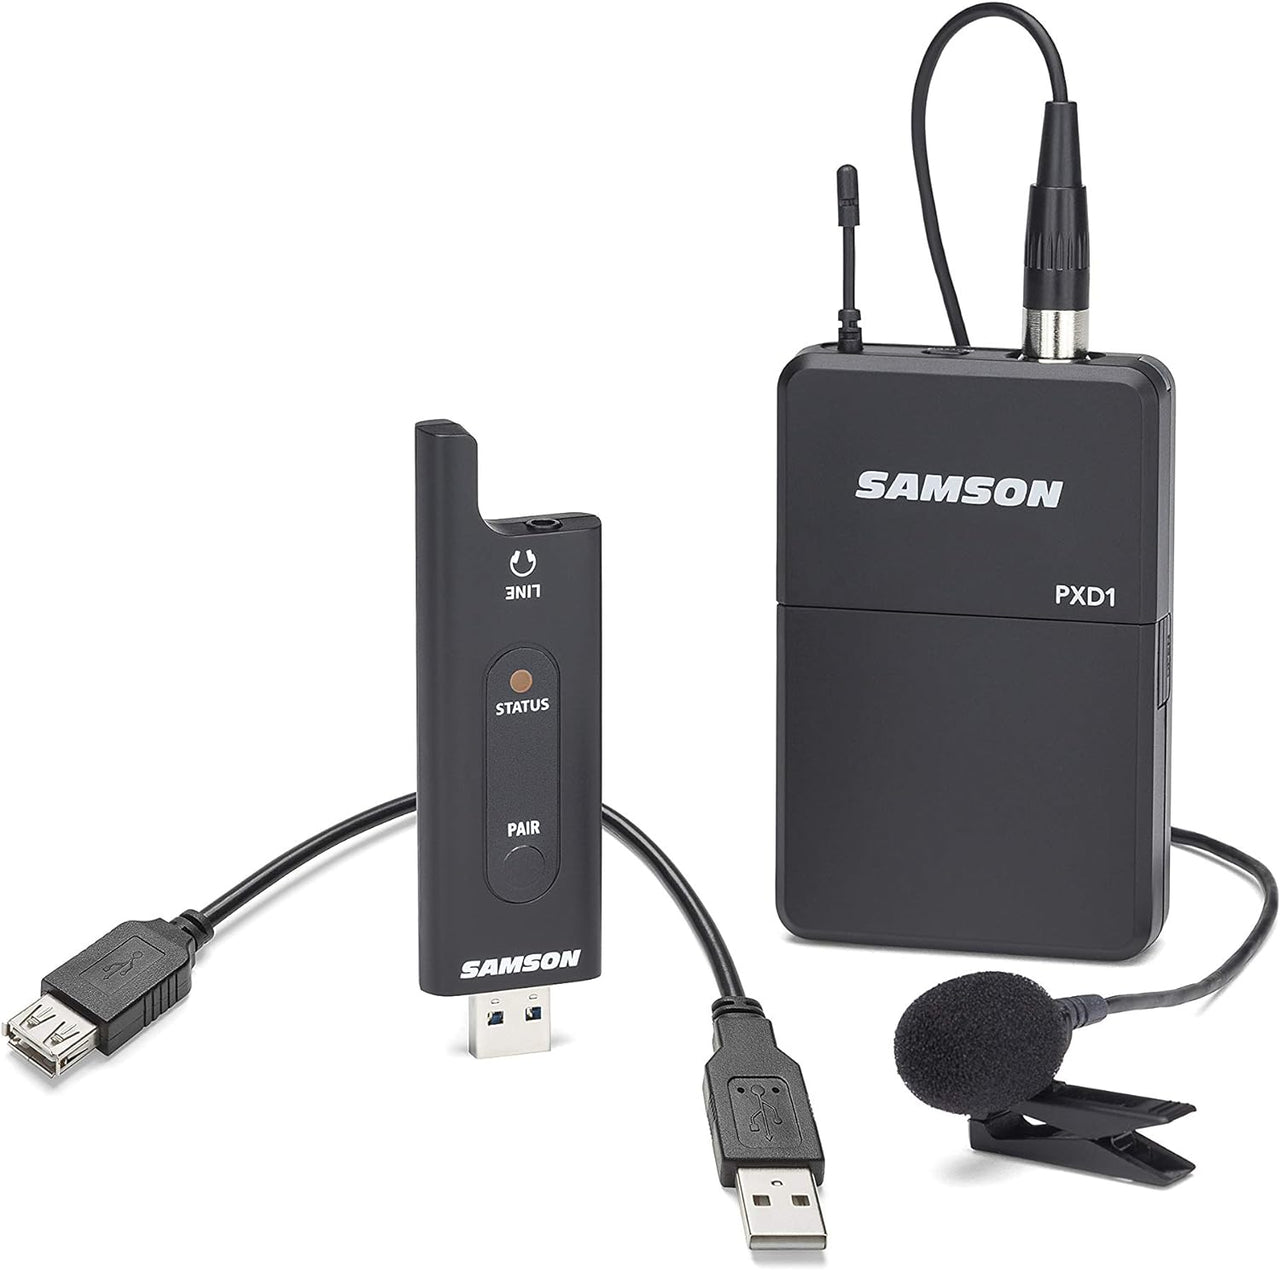 Samson XPD2 Lavalier USB Digital Wireless System with Lavalier Microphone and USB Stick Receiver, Works with Computers and Samson Expedition Portable PA Systems